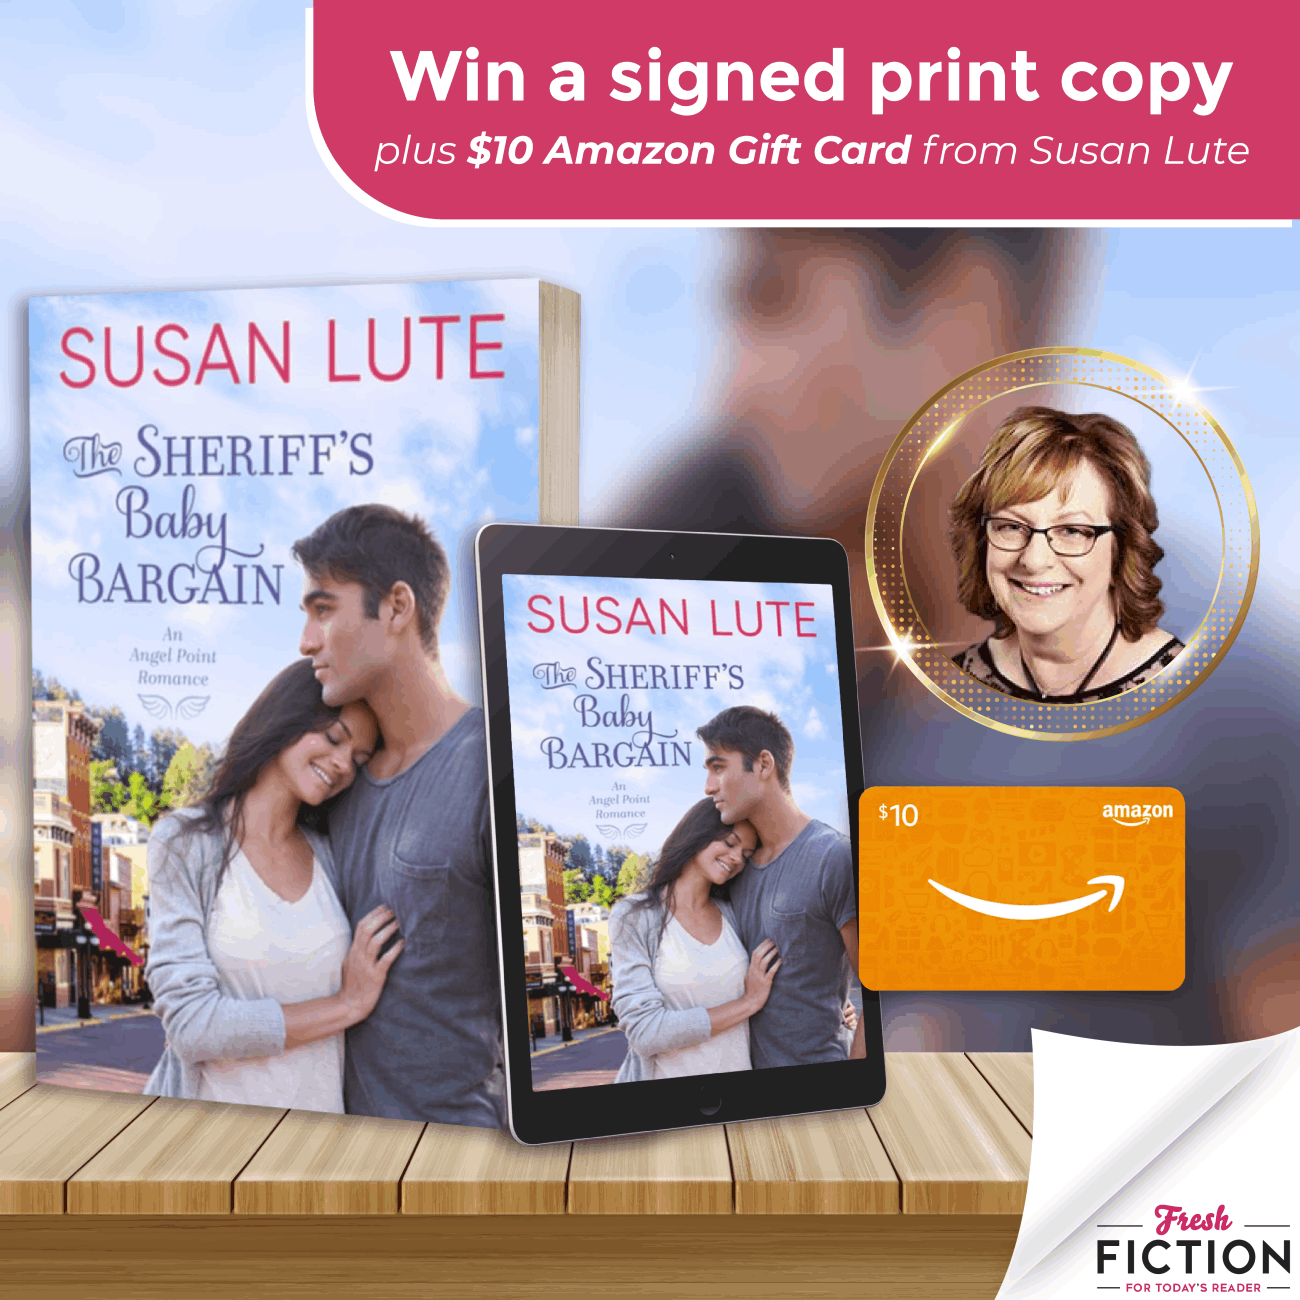 Win a signed print copy and a $10 Amazon gift card of The Sheriff's Baby Bargain by Susan Lute - the perfect blend of romance and suspense!